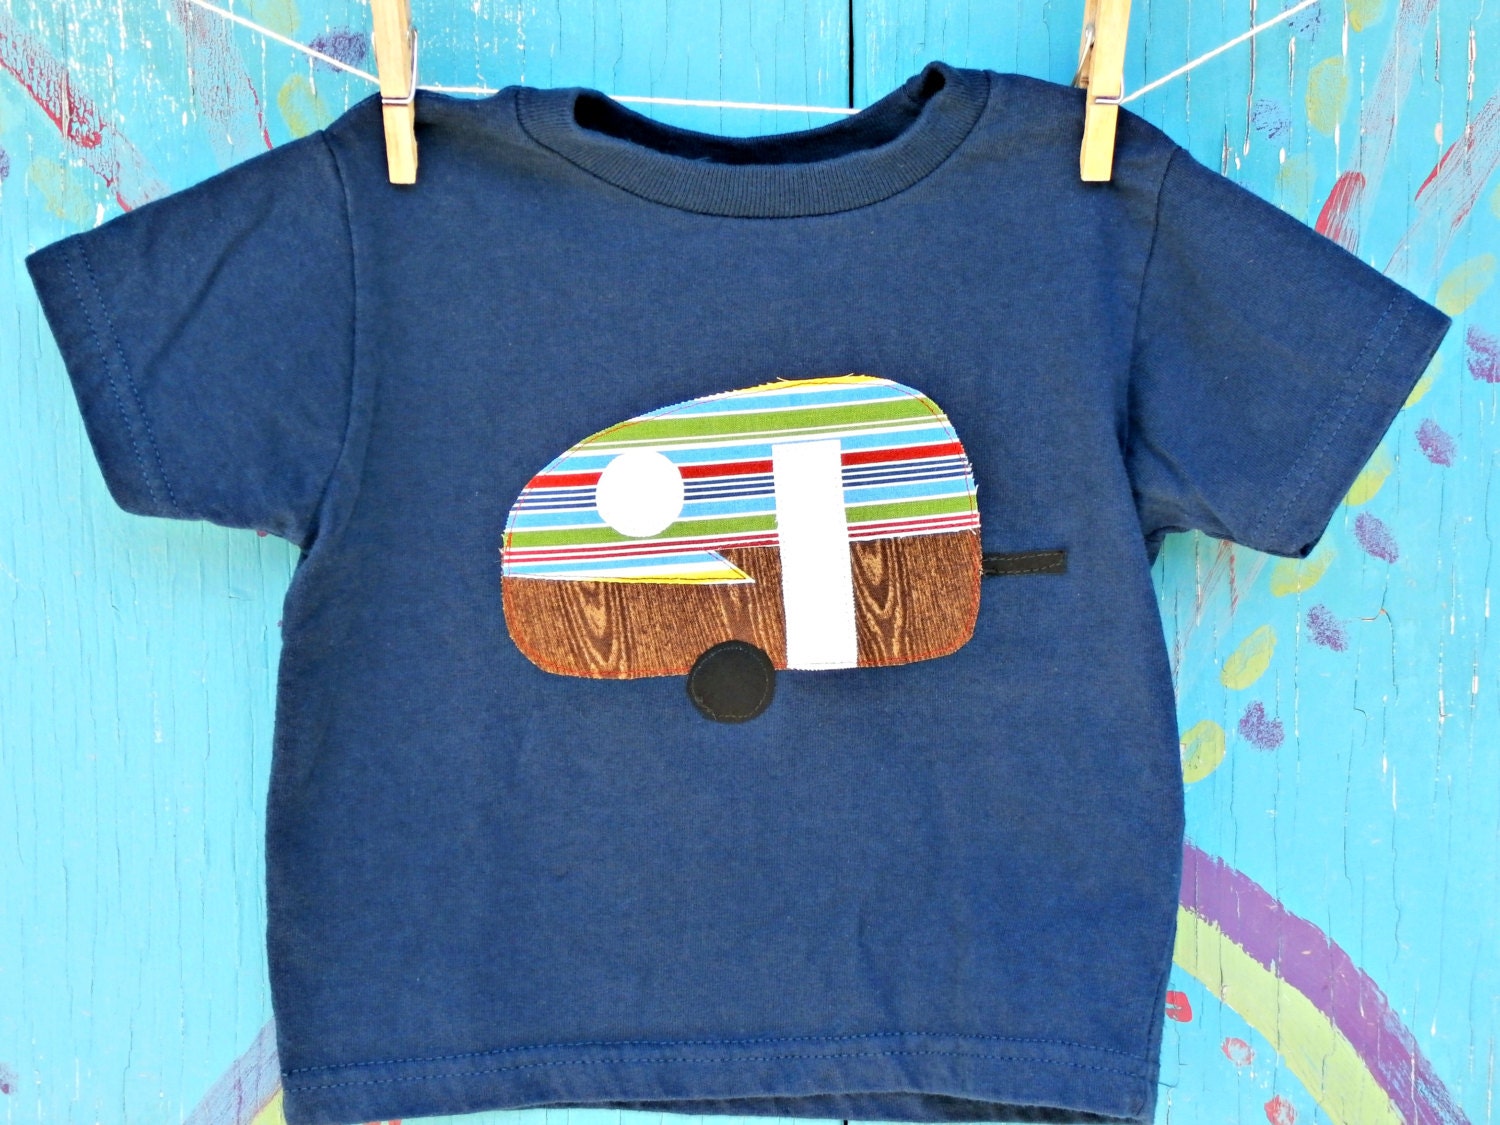 Appliqued Camper T-shirt, Navy with Primary Color/Wood Grain Trailer, Boy's Size 3T READY-TO-SHIP, Other Sizes Available Upon Request - JaneandJoshua